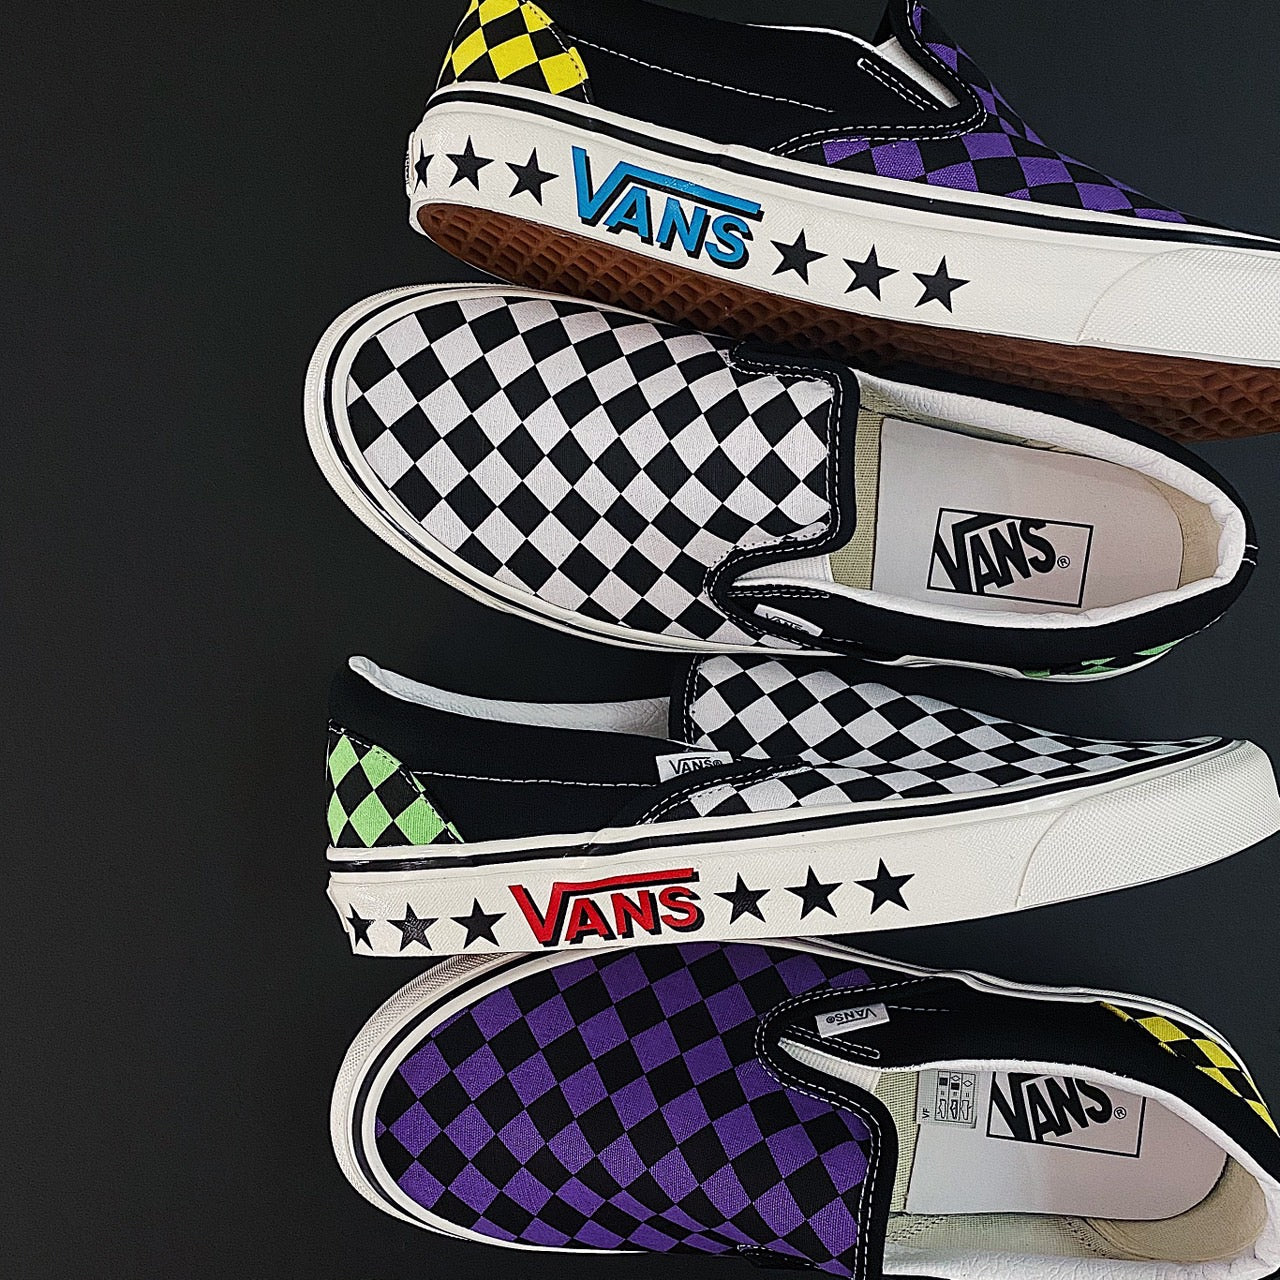 【VANS】<br> A new lineup of classic popular shoes 「CLASSIC SLIP-ON 98DX」